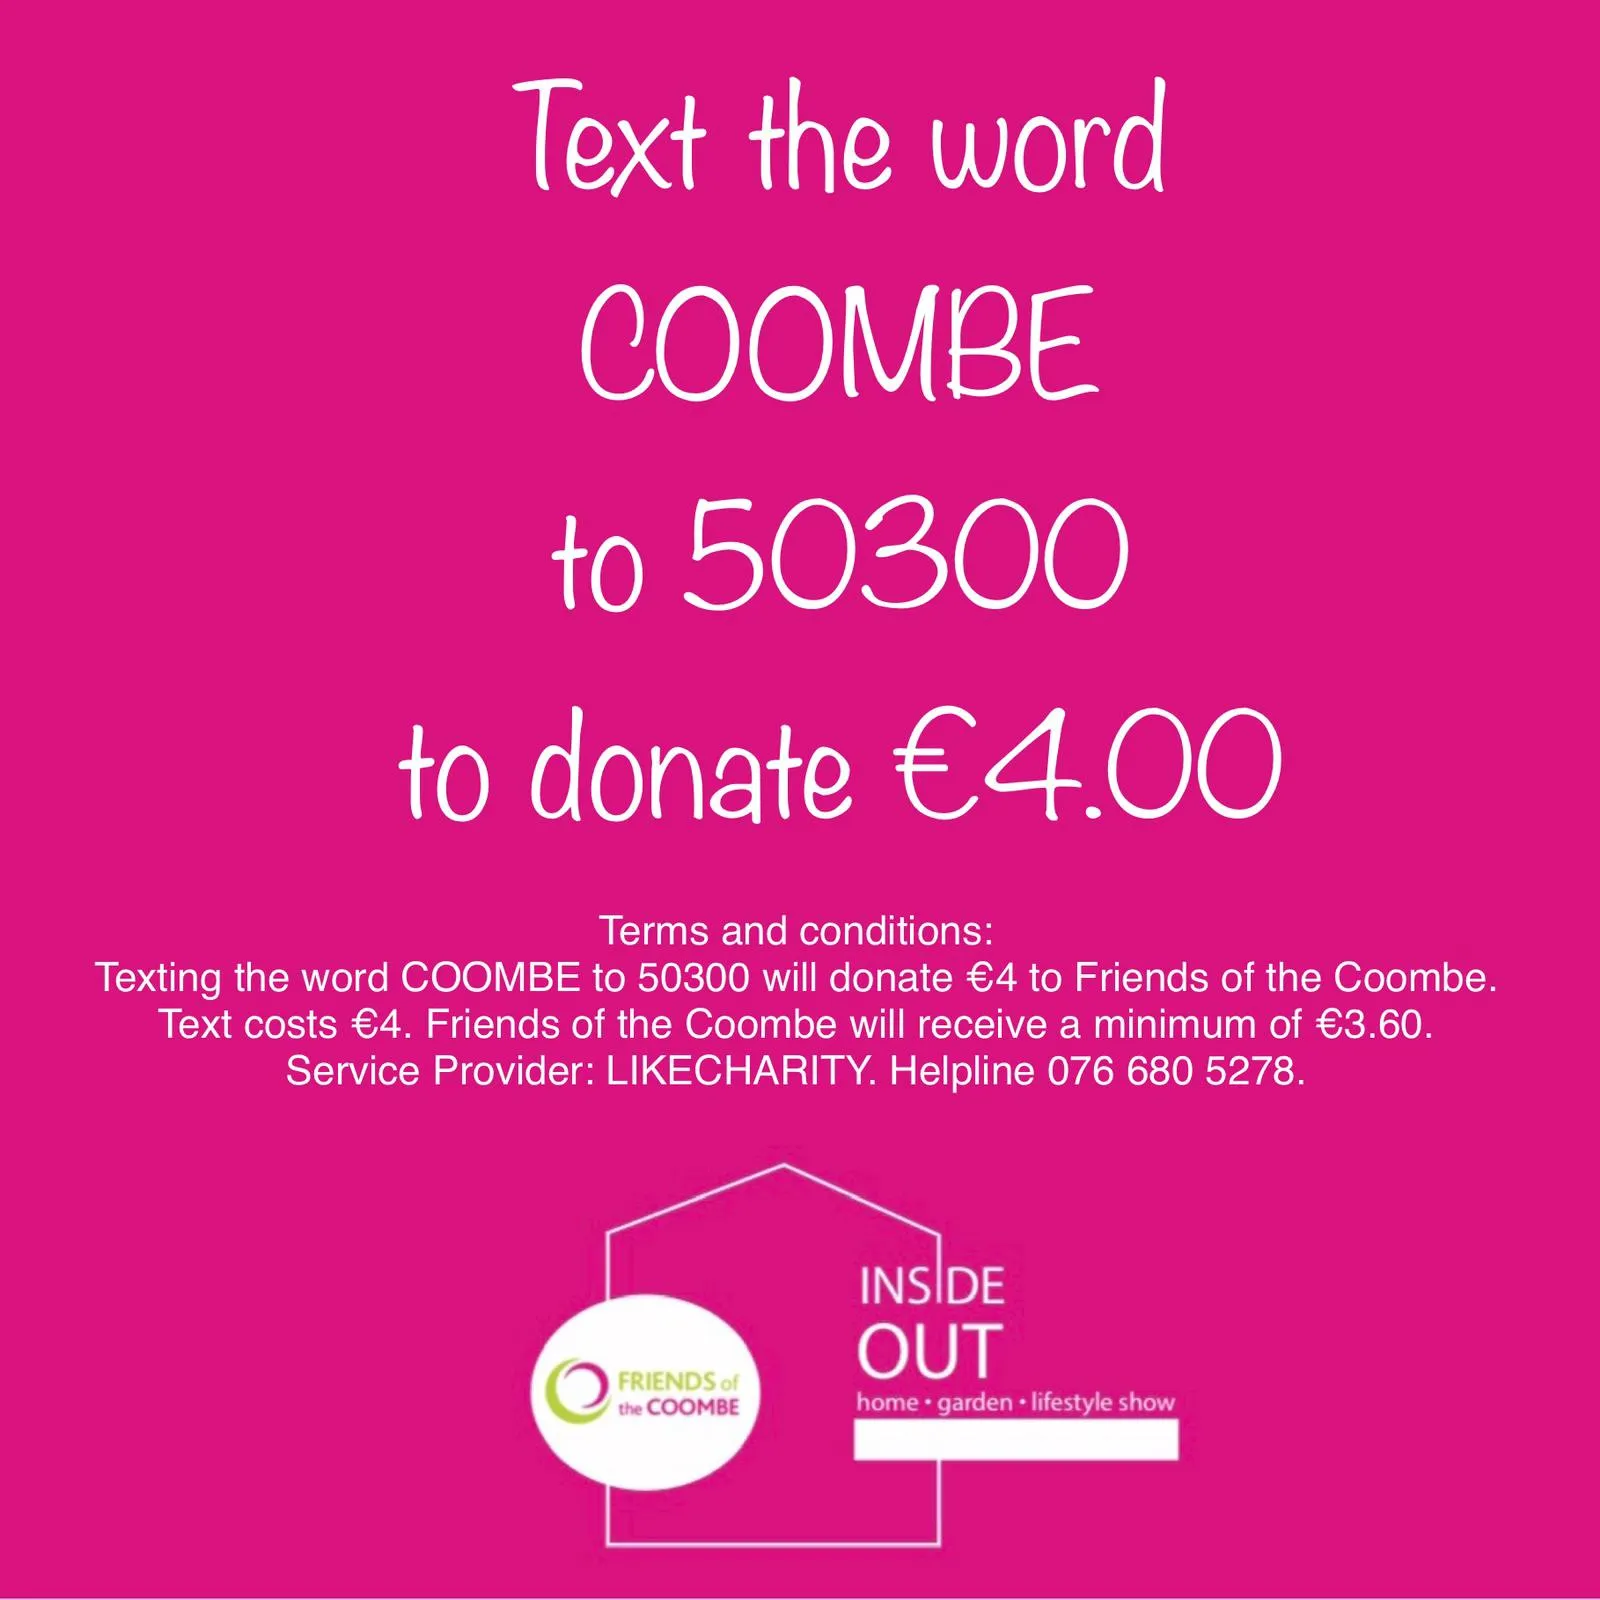 Friends of the Coombe